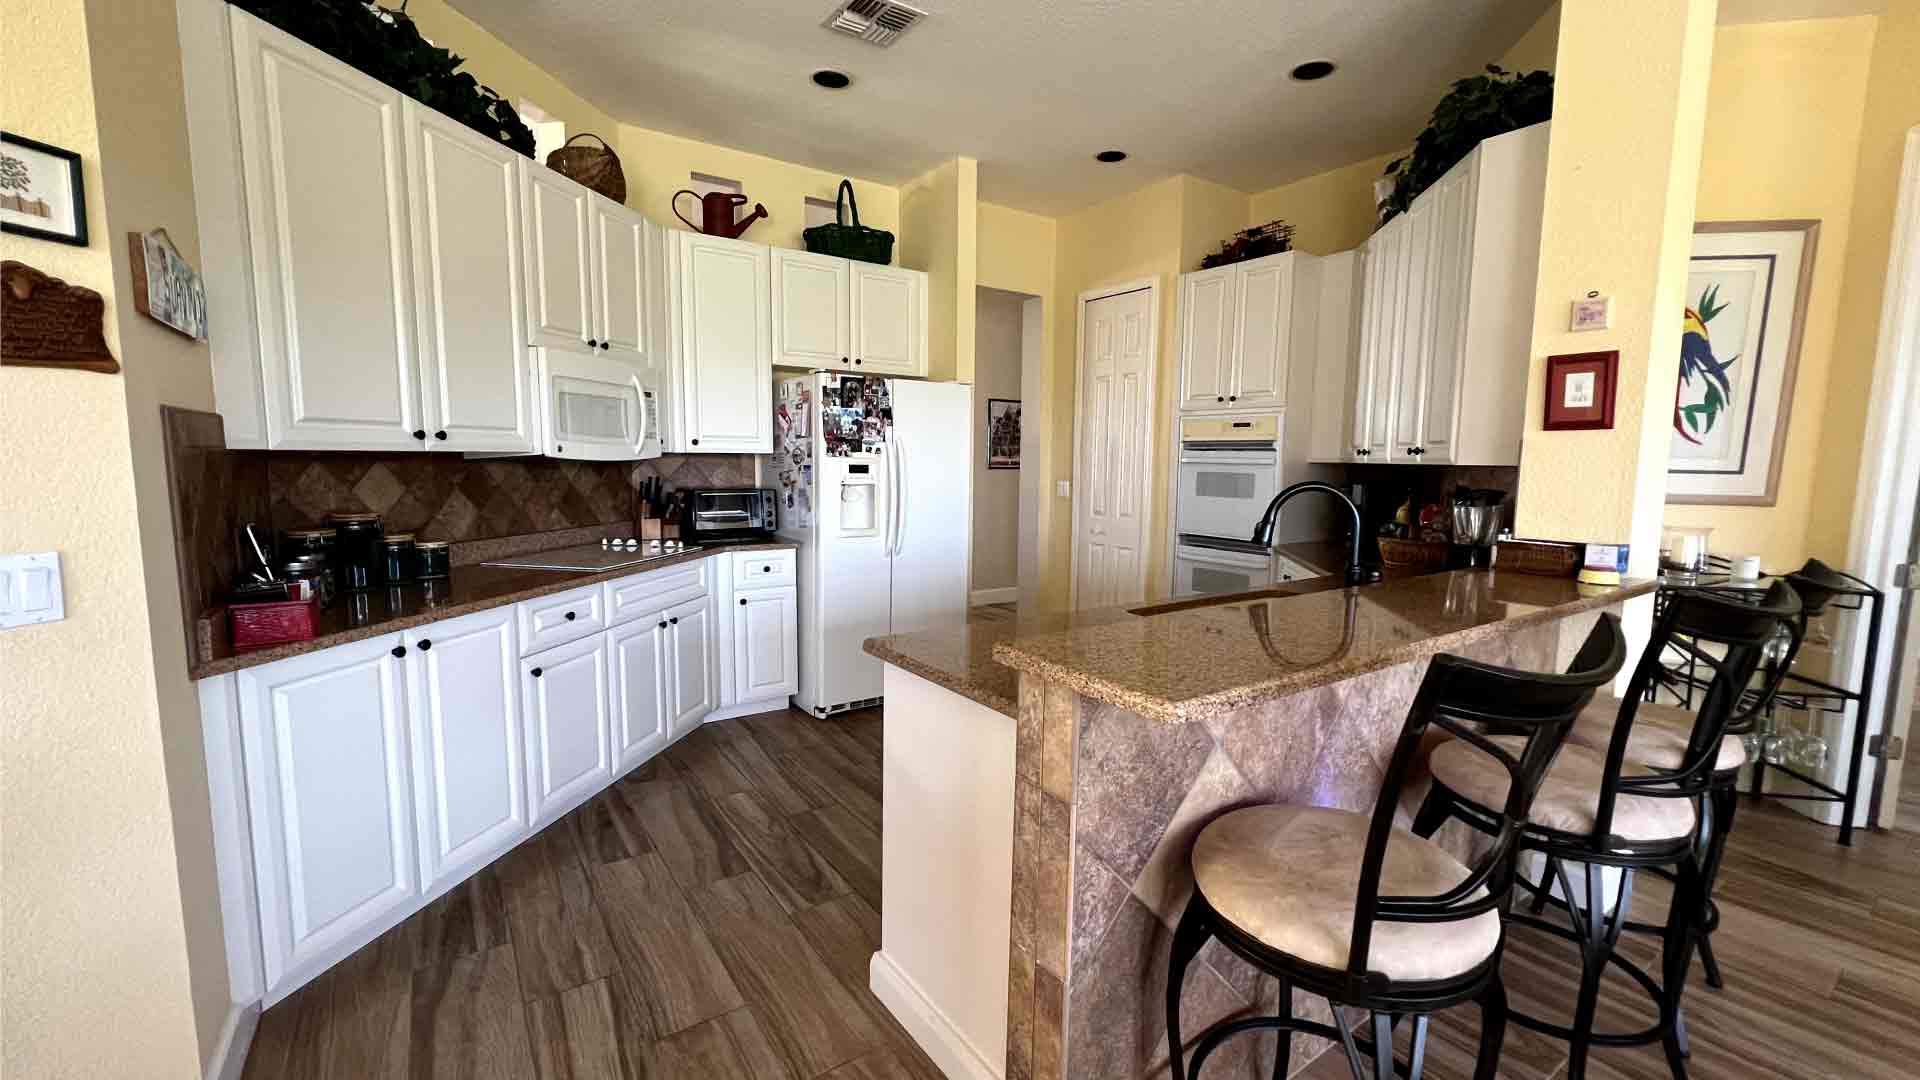 Kitchen - Regular cleaning in Cape Coral by Goldmillio - Apr 18